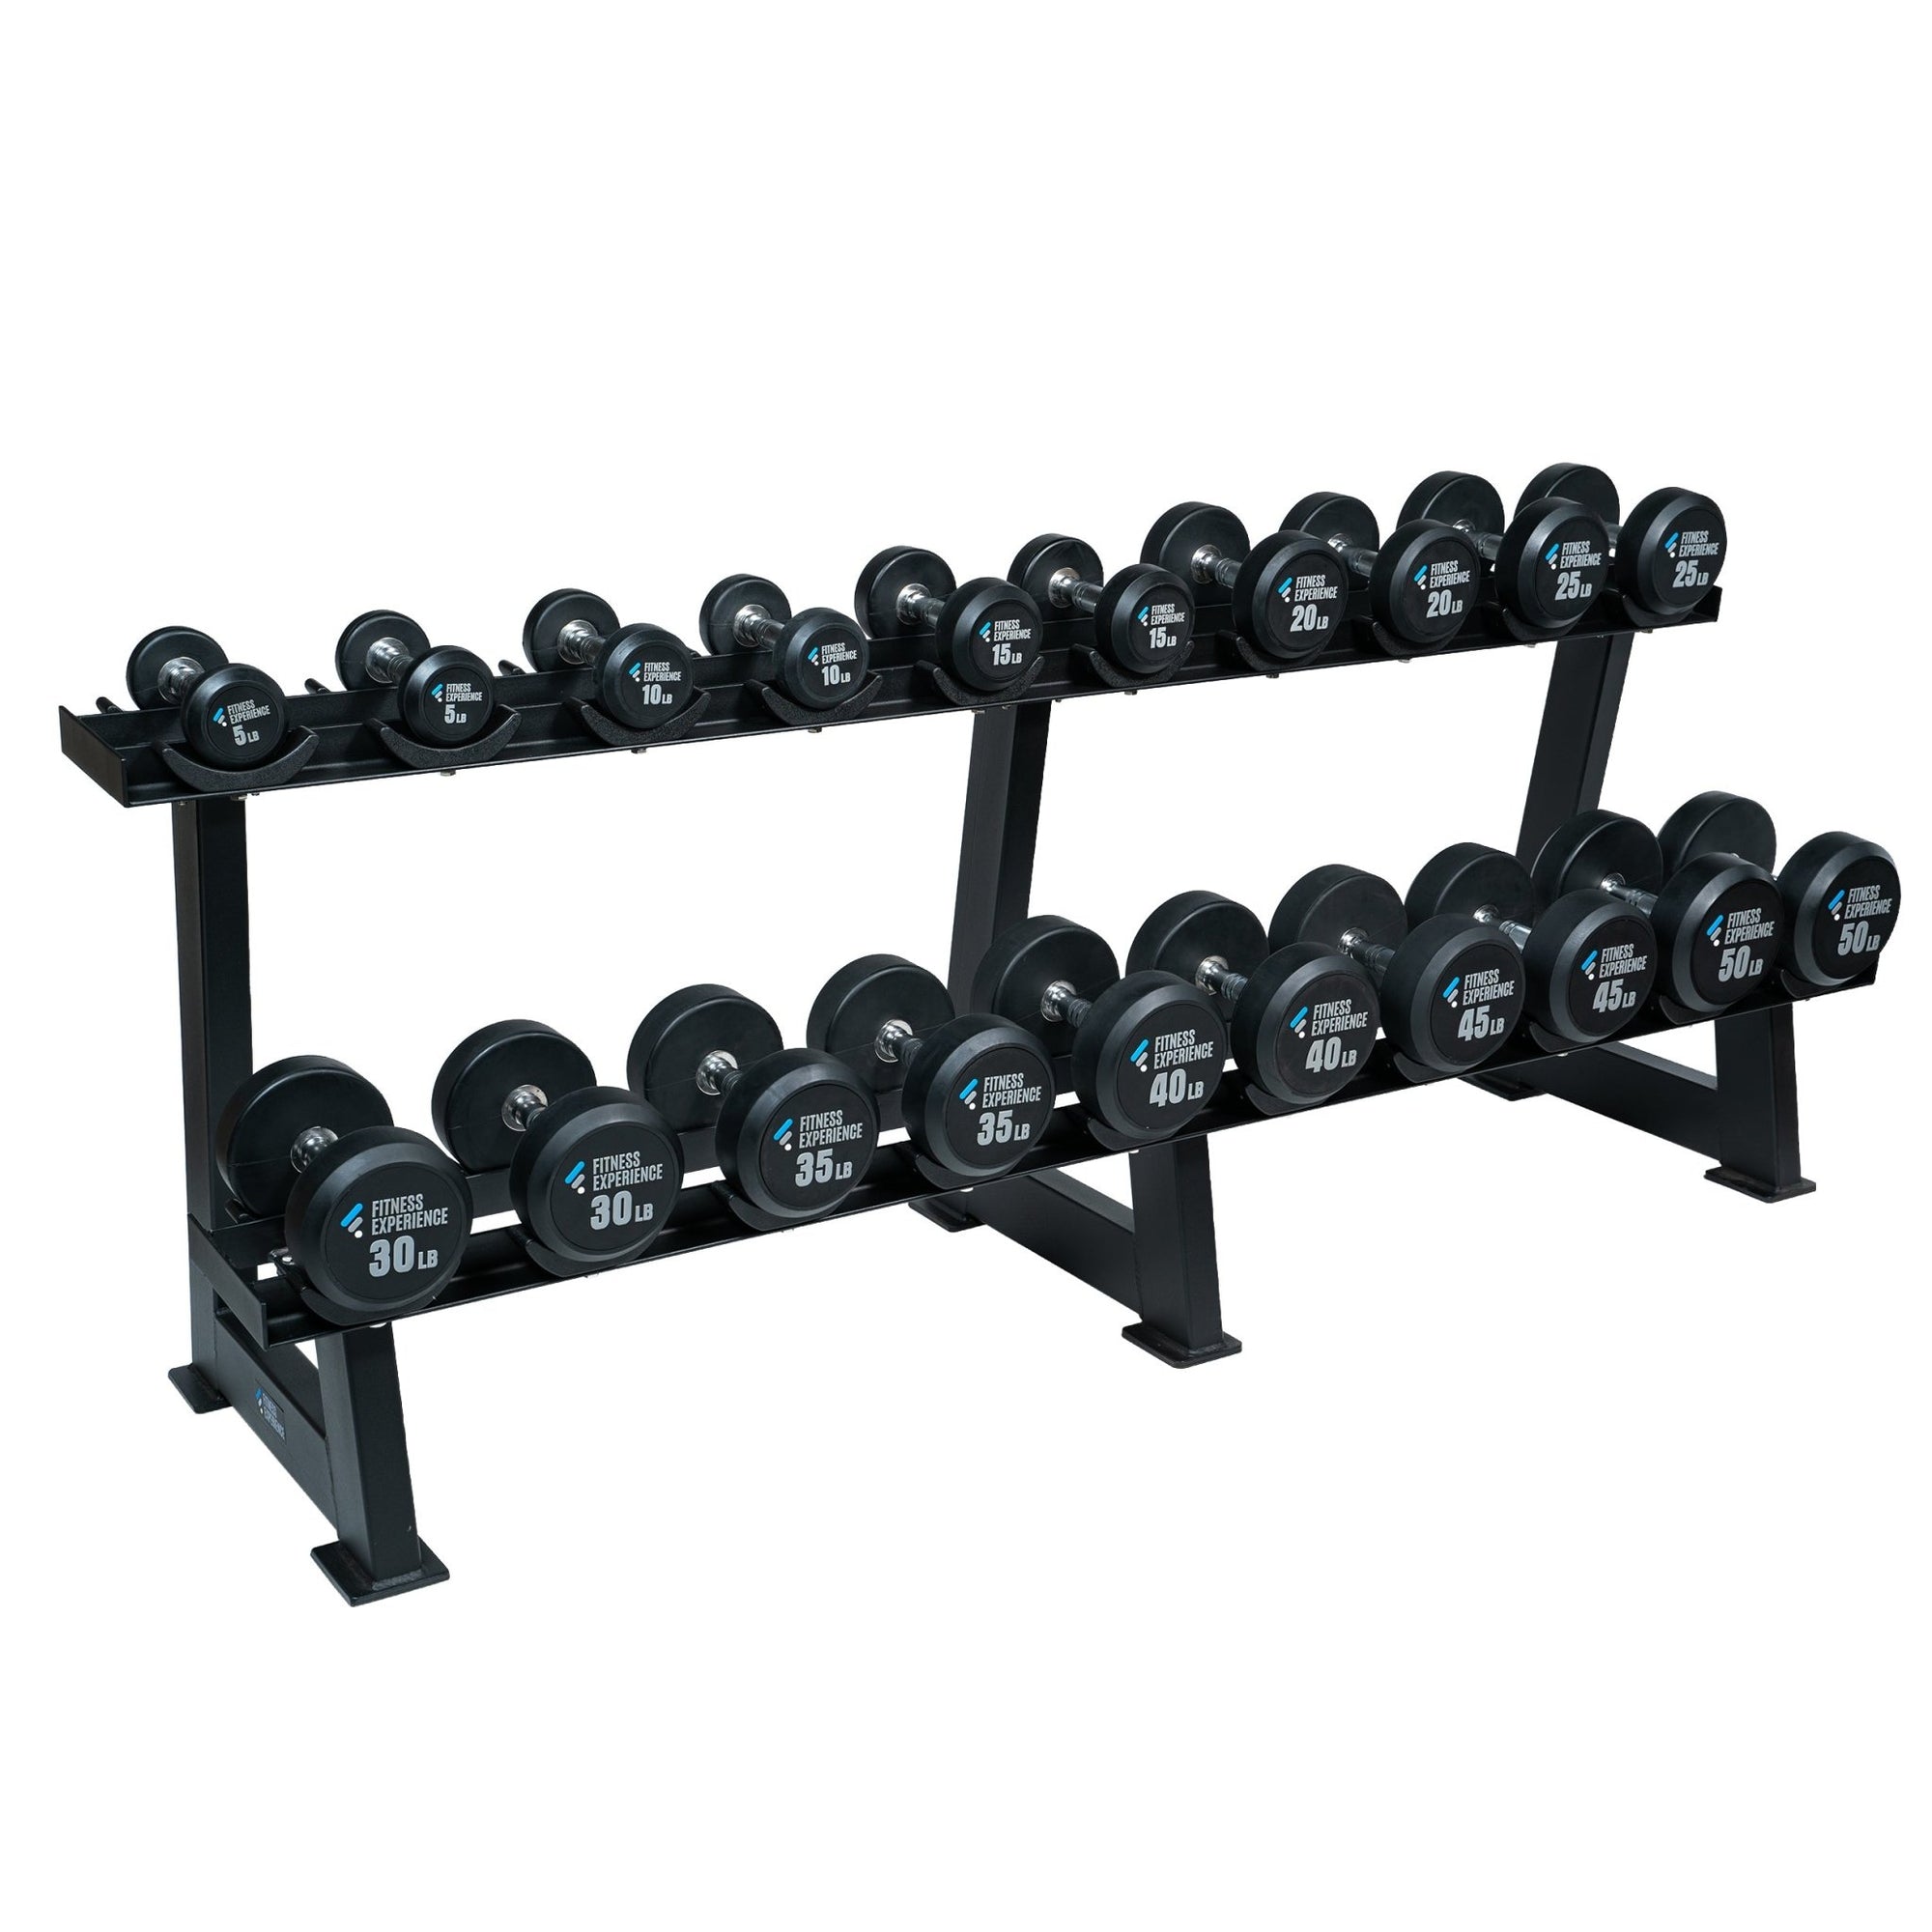 FitWay Equip. Saddle Dumbbell Rack - 10 Pair